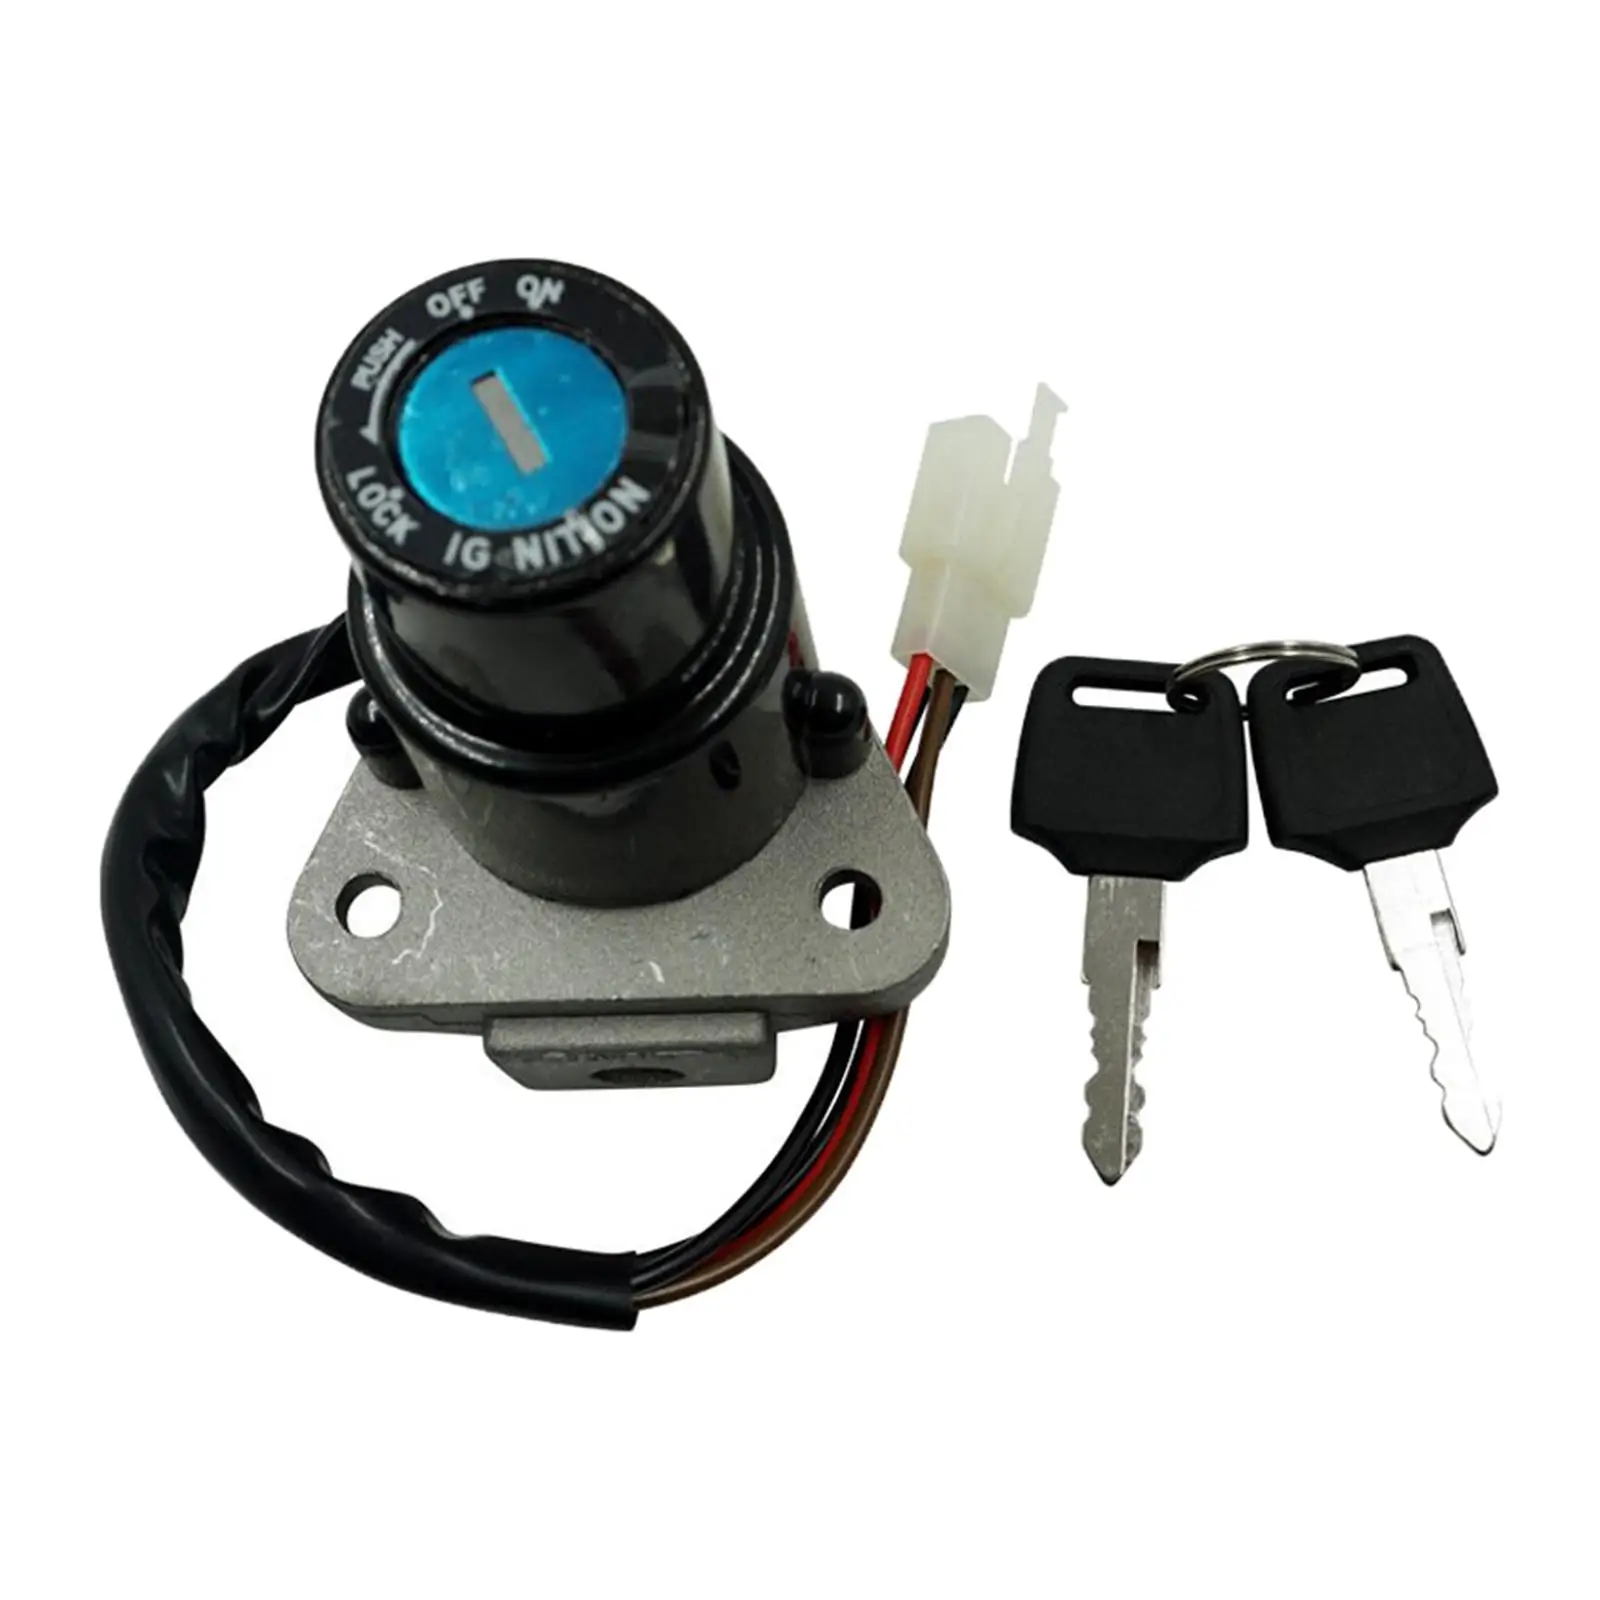 Motorbike Ignition Switch Key Electric Door Lock Fit for DT125 TW225